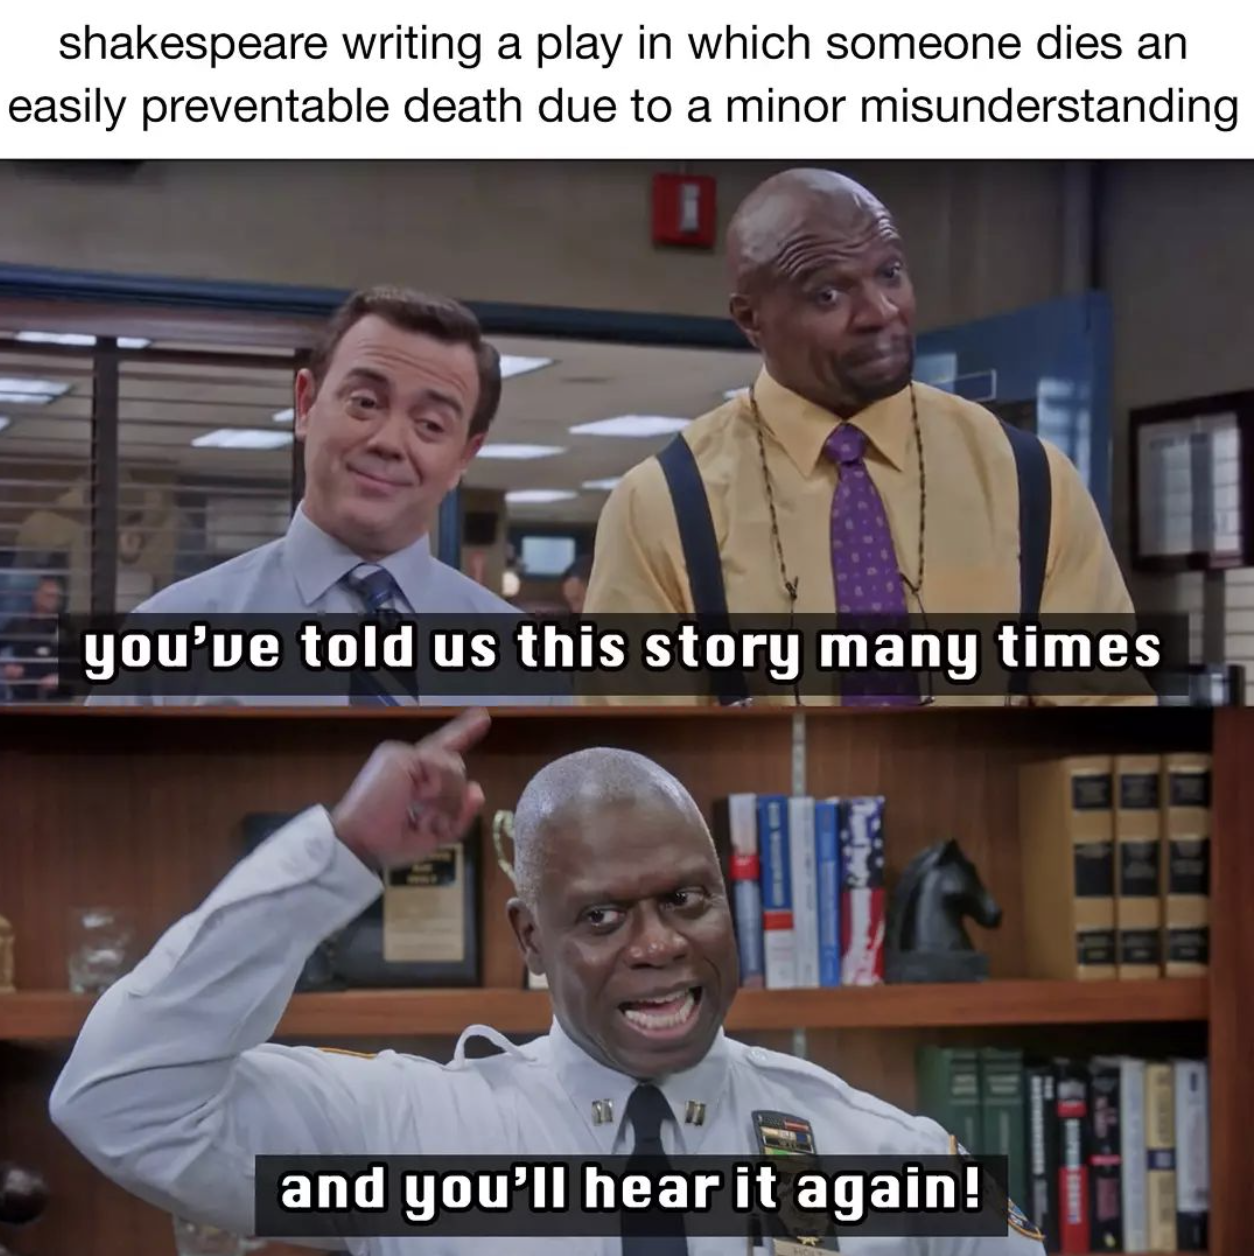 SparkNotes memes - preventable death meme - shakespeare writing a play in which someone dies an easily preventable death due to a minor misunderstanding you've told us this story many times and you'll hear it again!